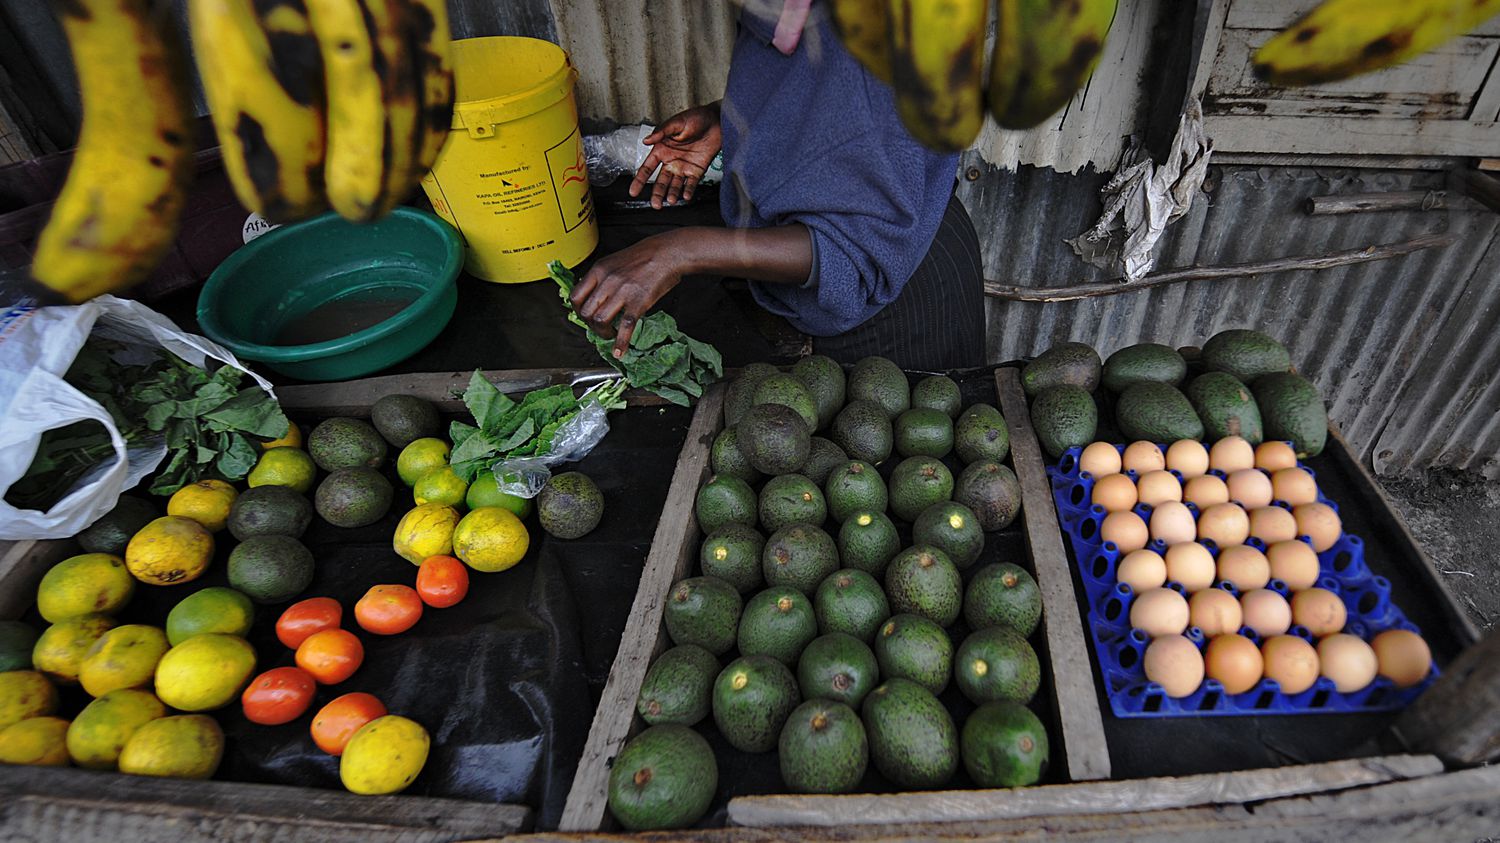 Food insecurity: one in five Africans went hungry in 2021
